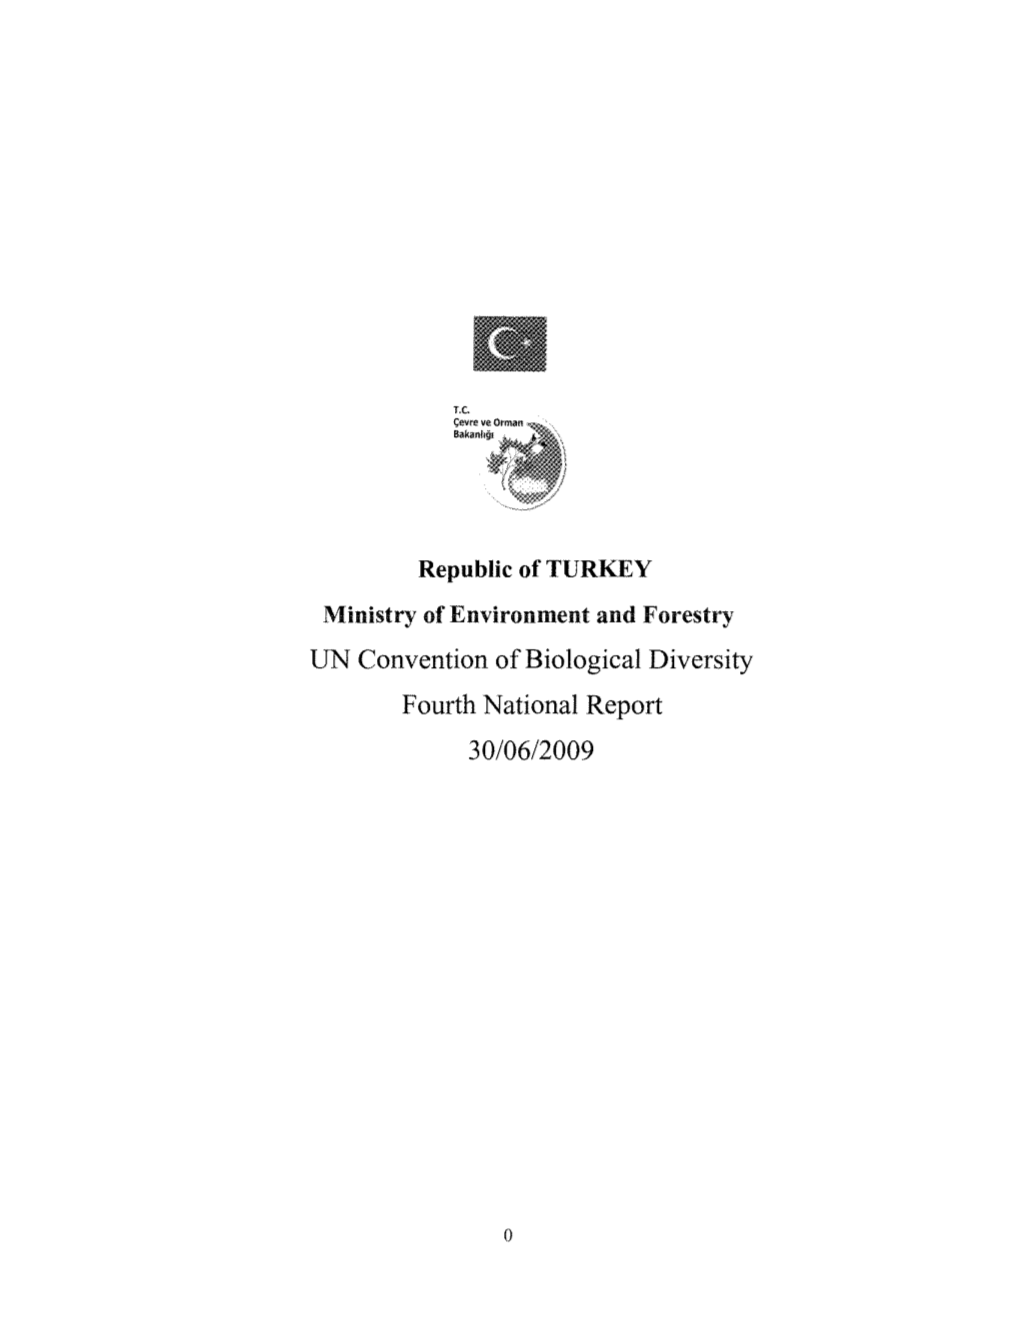 TURKEY Ministry of Environment and Forestry UN Convention of Biological Diversity Fourth National Report 30106/2009